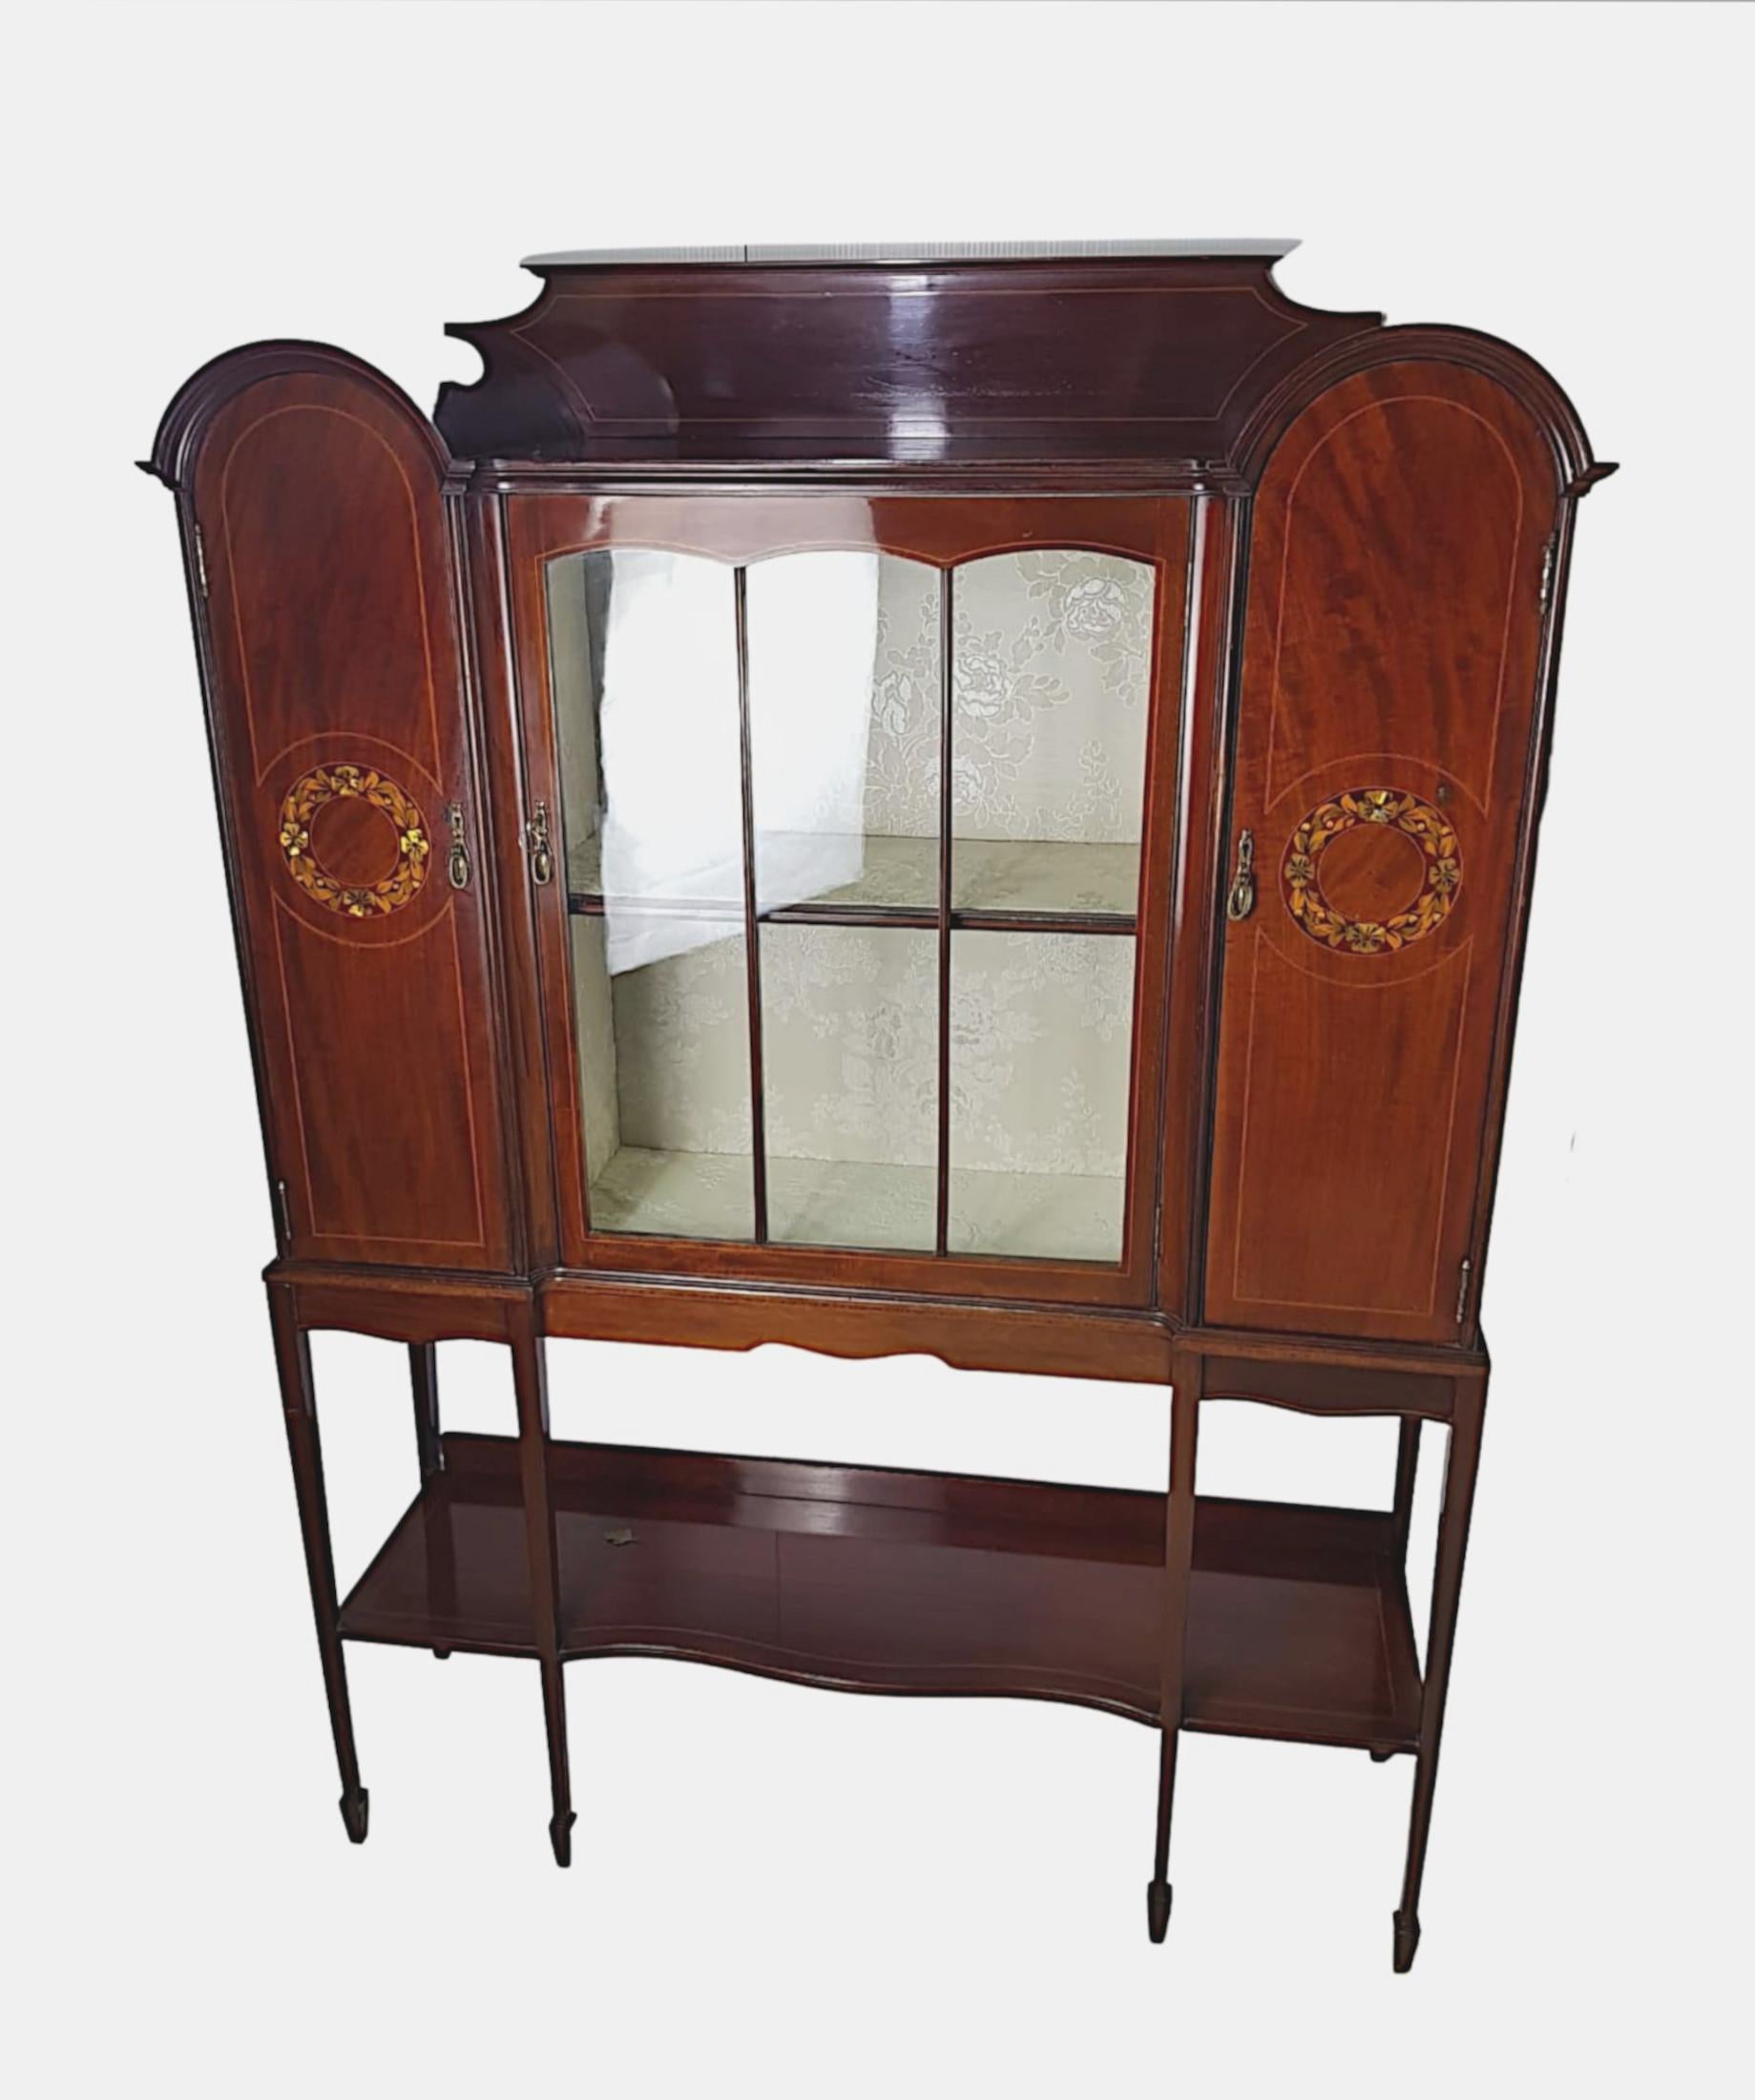 English Stunning Pair of Edwardian Inlaid Mahogany Display Cases For Sale